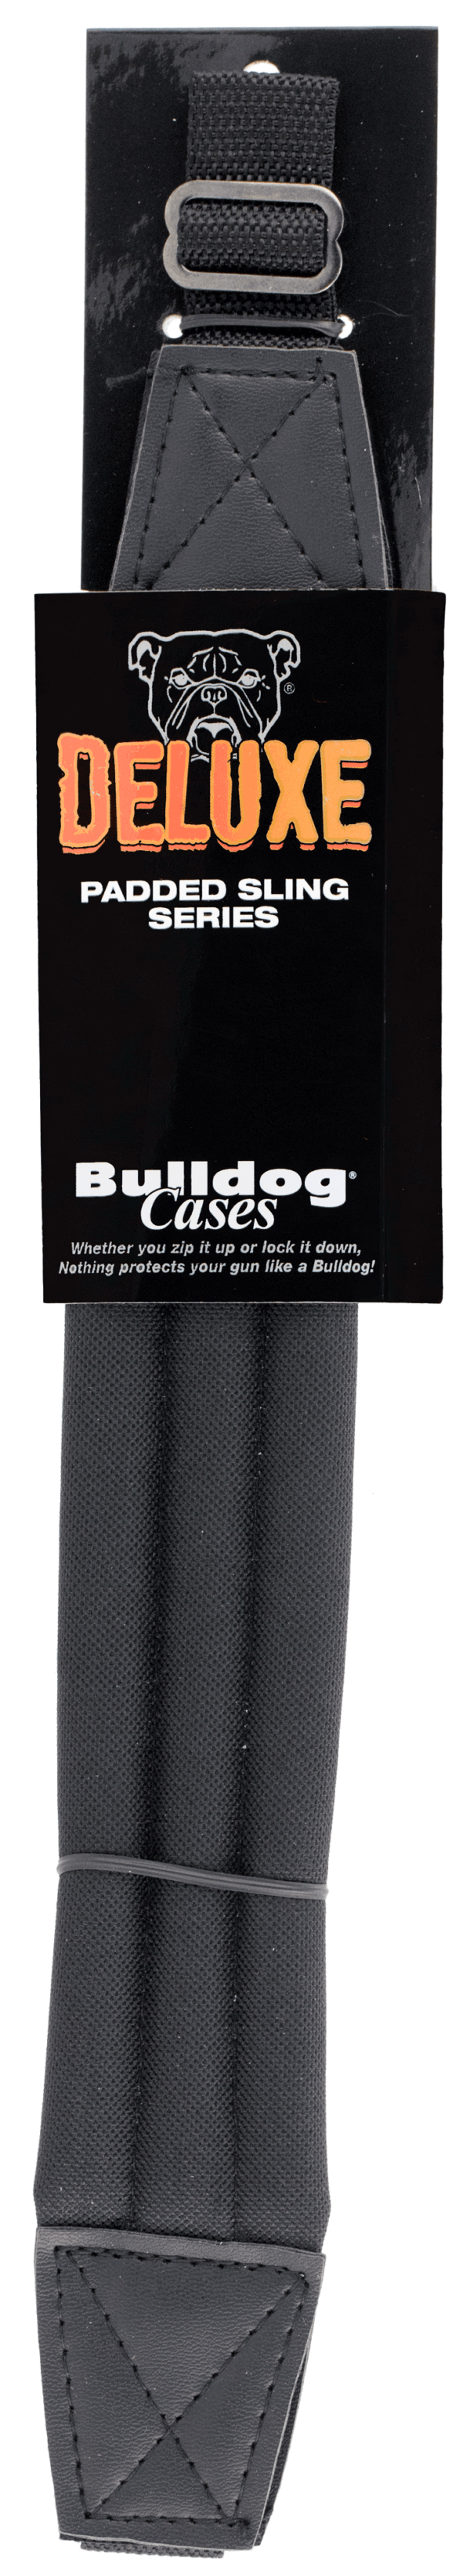 Bulldog BD810 Deluxe Sling made of Black Nylon with 1″ W & Padded Design for Rifles